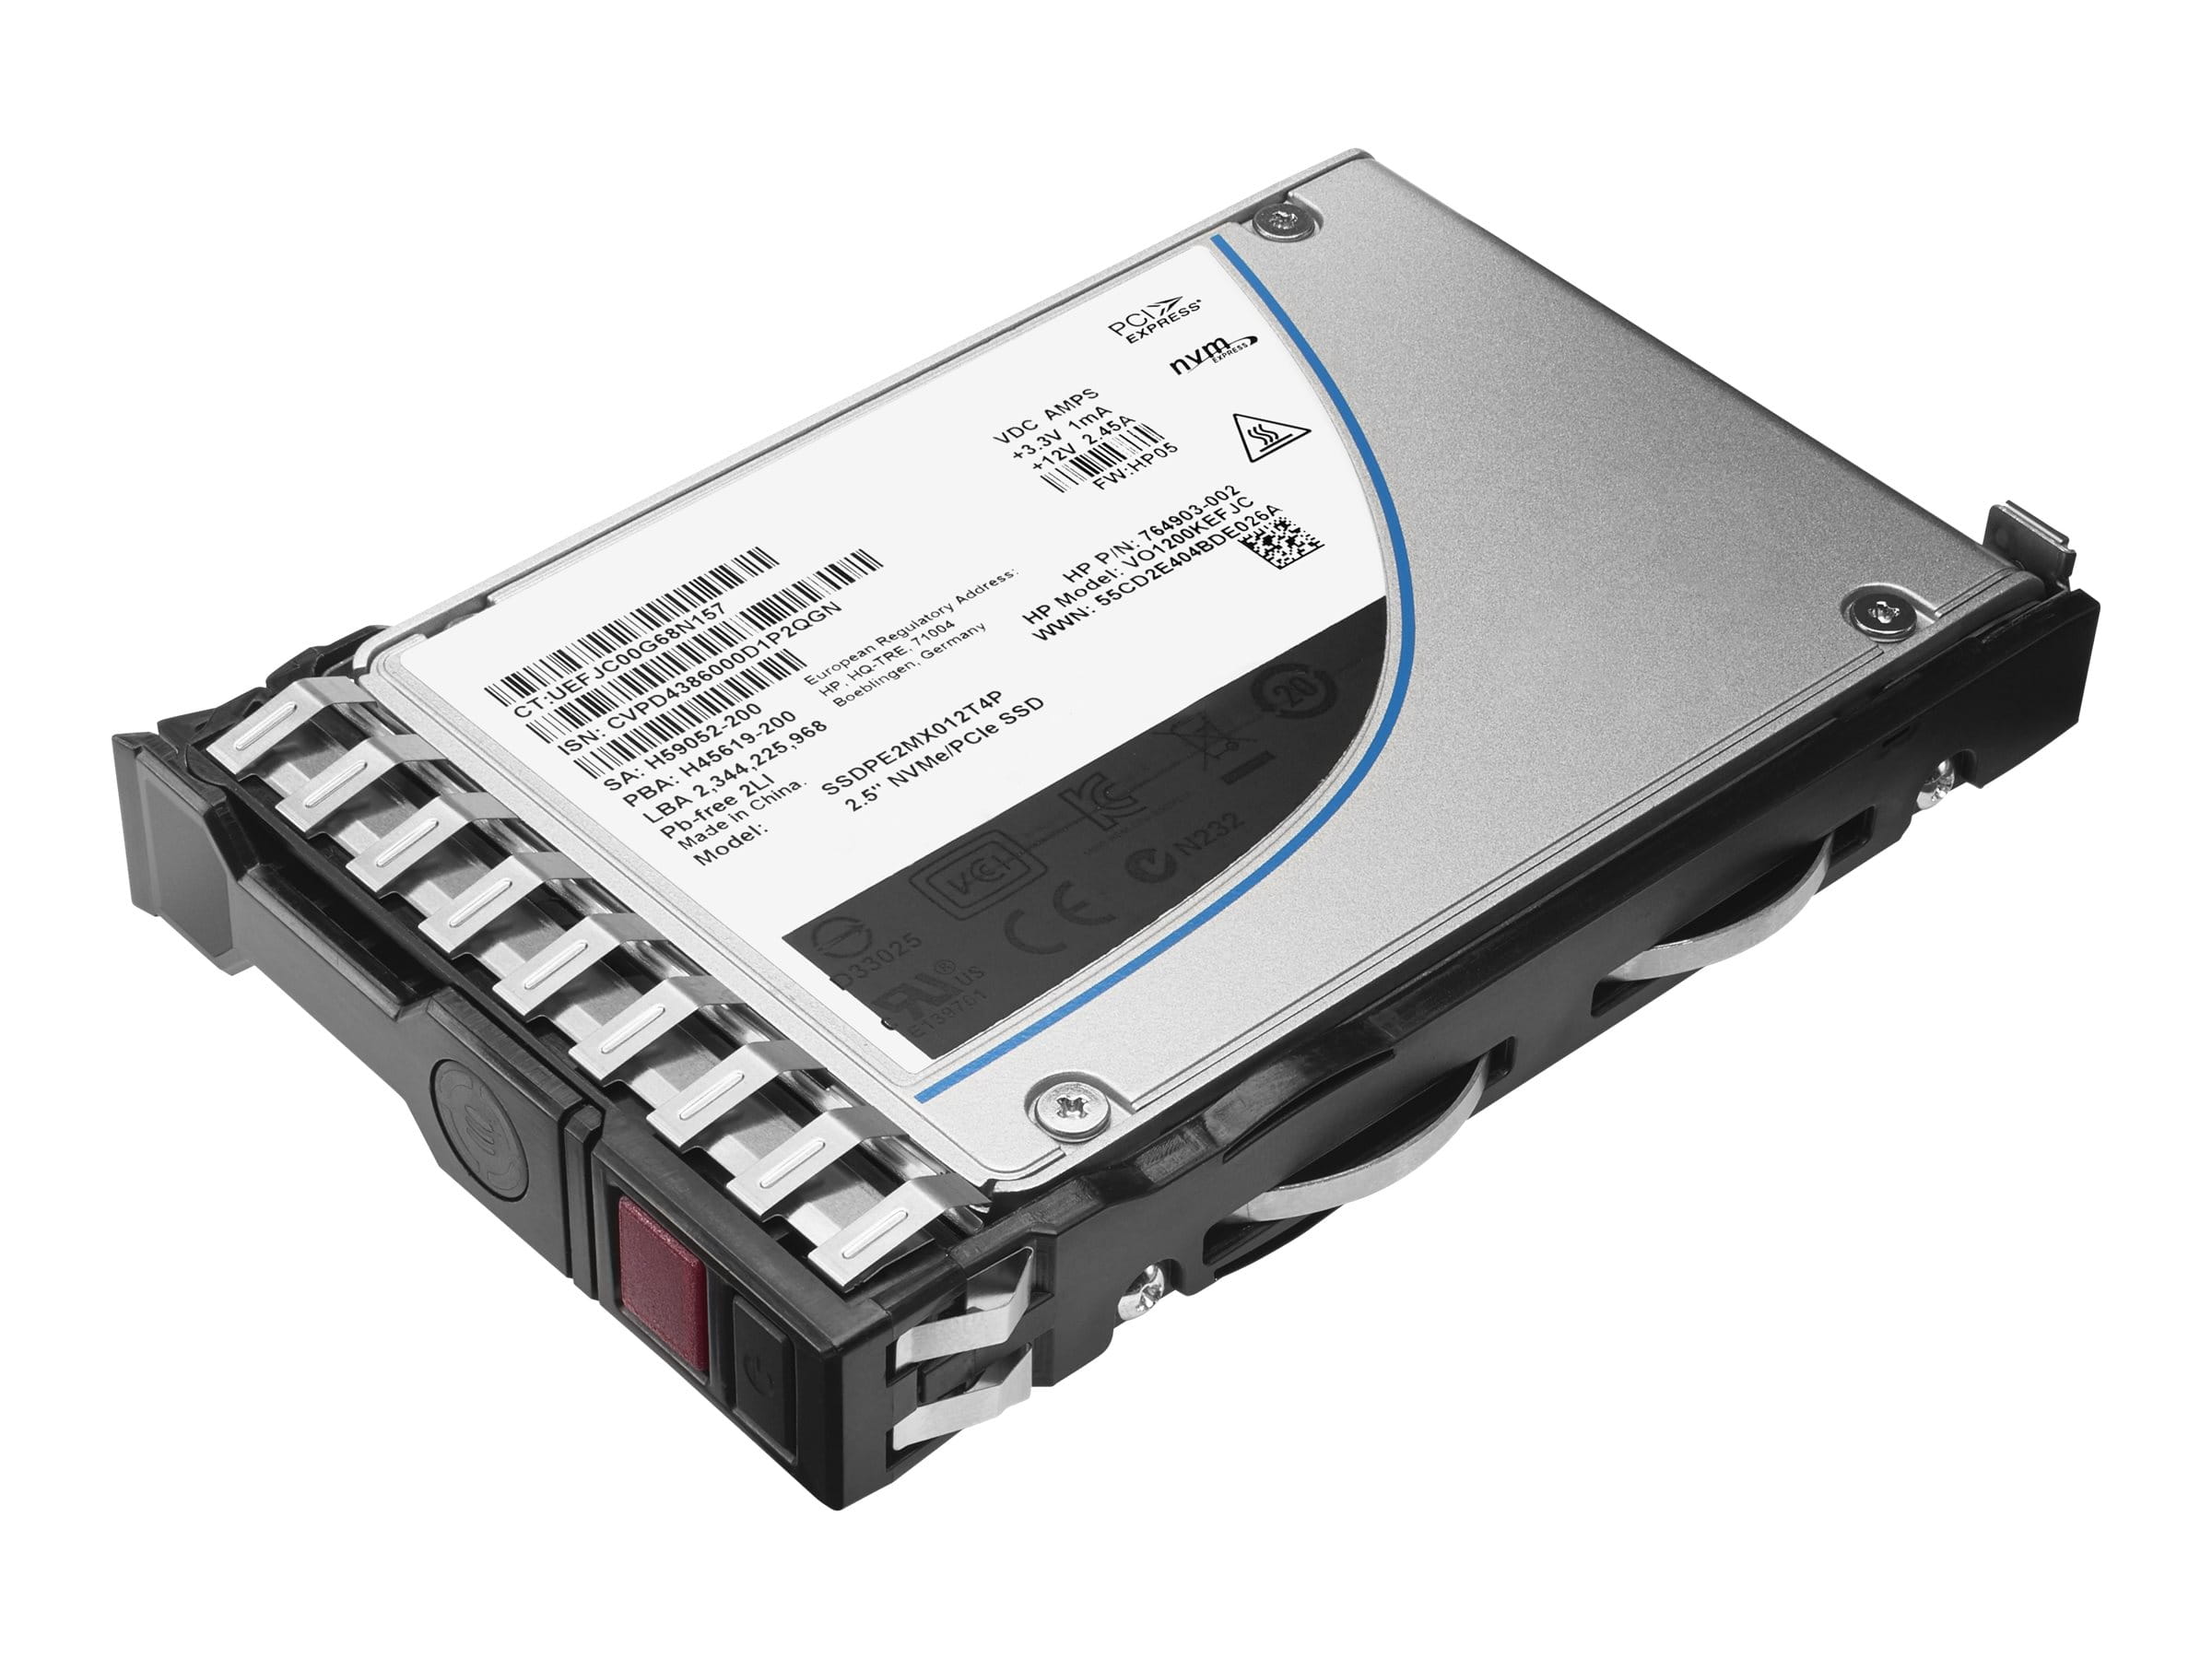 HPE Read Intensive High Performance PM1733a - SSD - High Performance, High Endurance - 1.92 TB - Hot-Swap - 2.5" SFF (6.4 cm SFF)